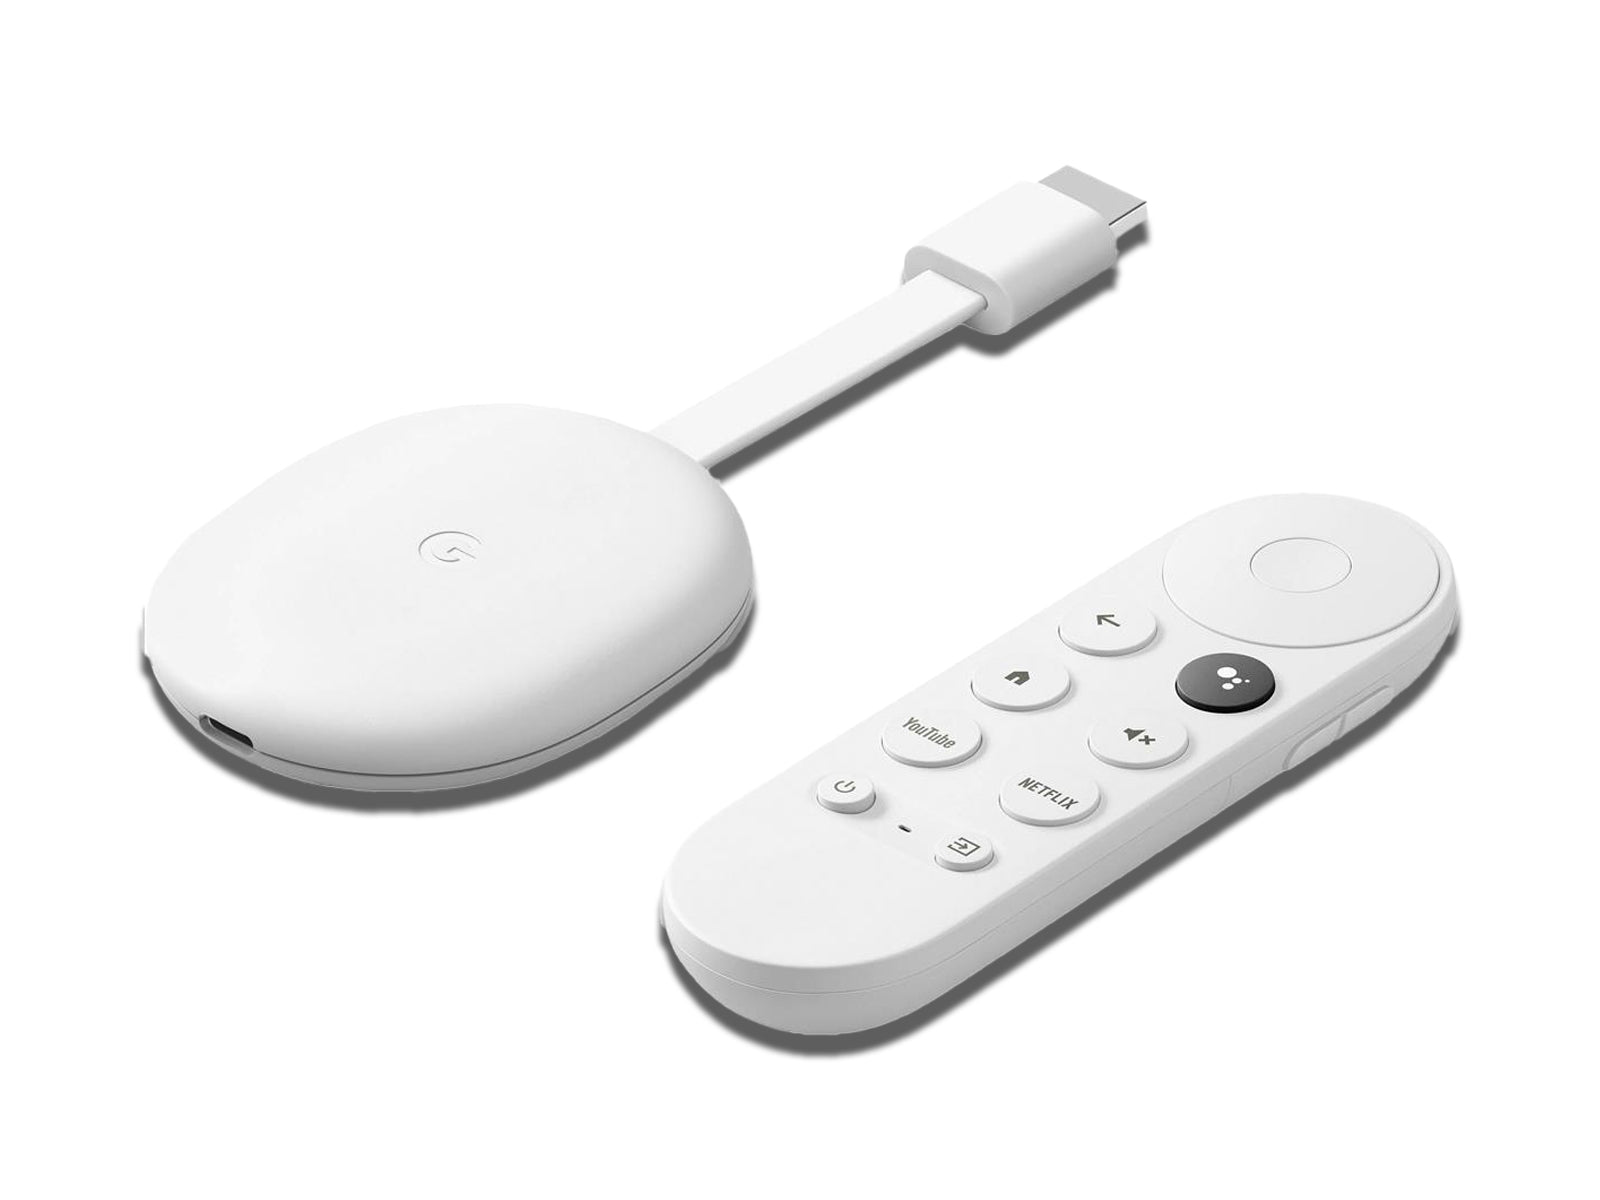 Side View Image of The Chromecast and Remote on the white background